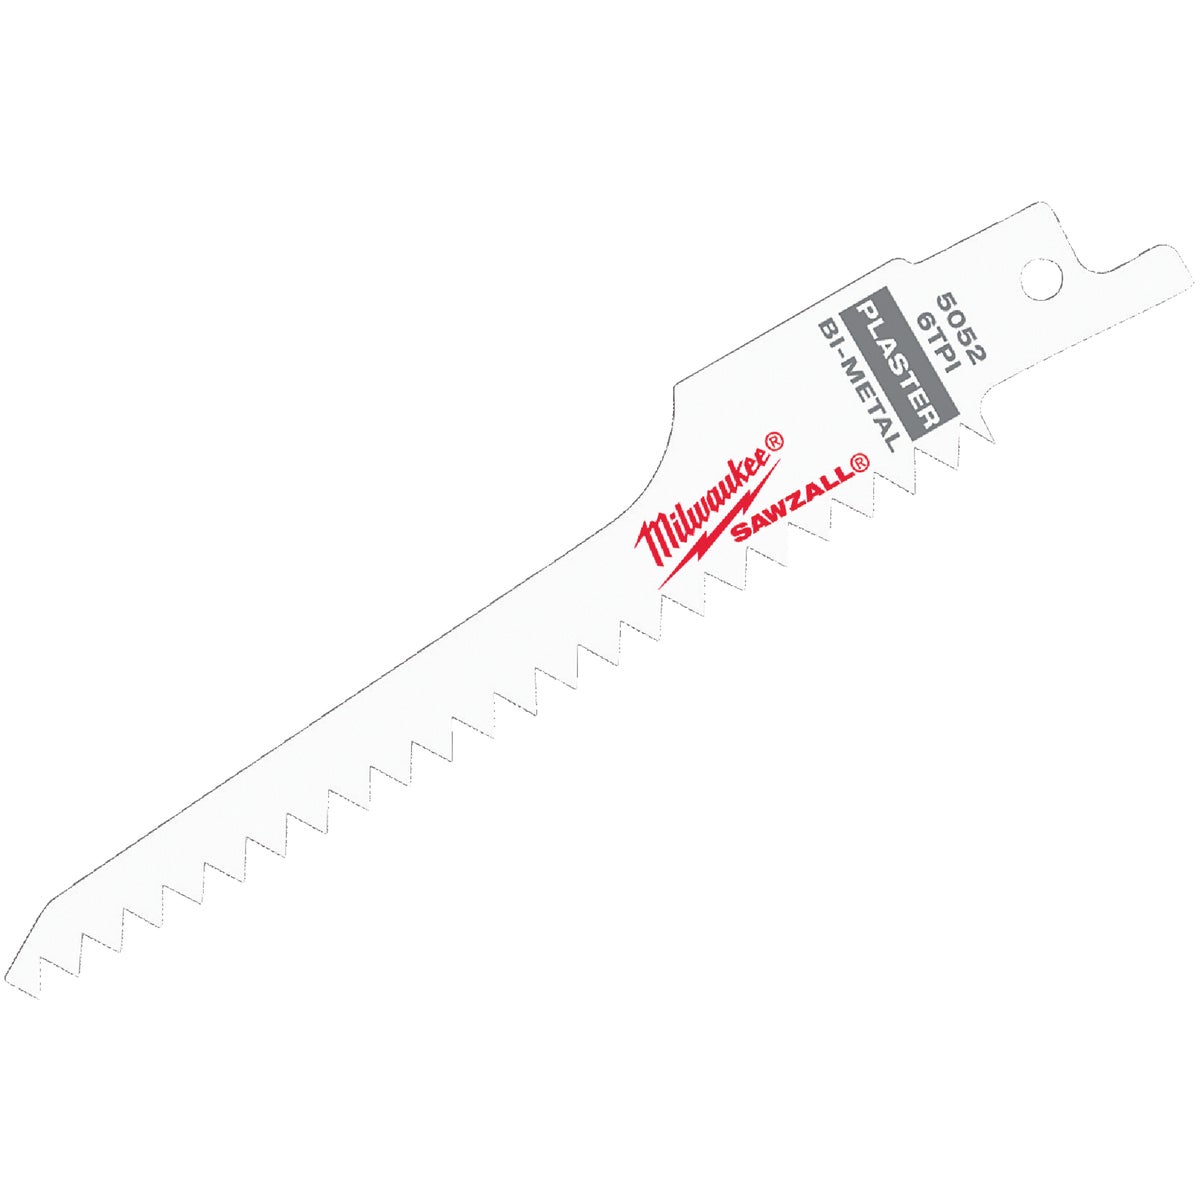 Item 383937, Bi-metal blade designed for cutting plaster, plasterboard, and plaster with